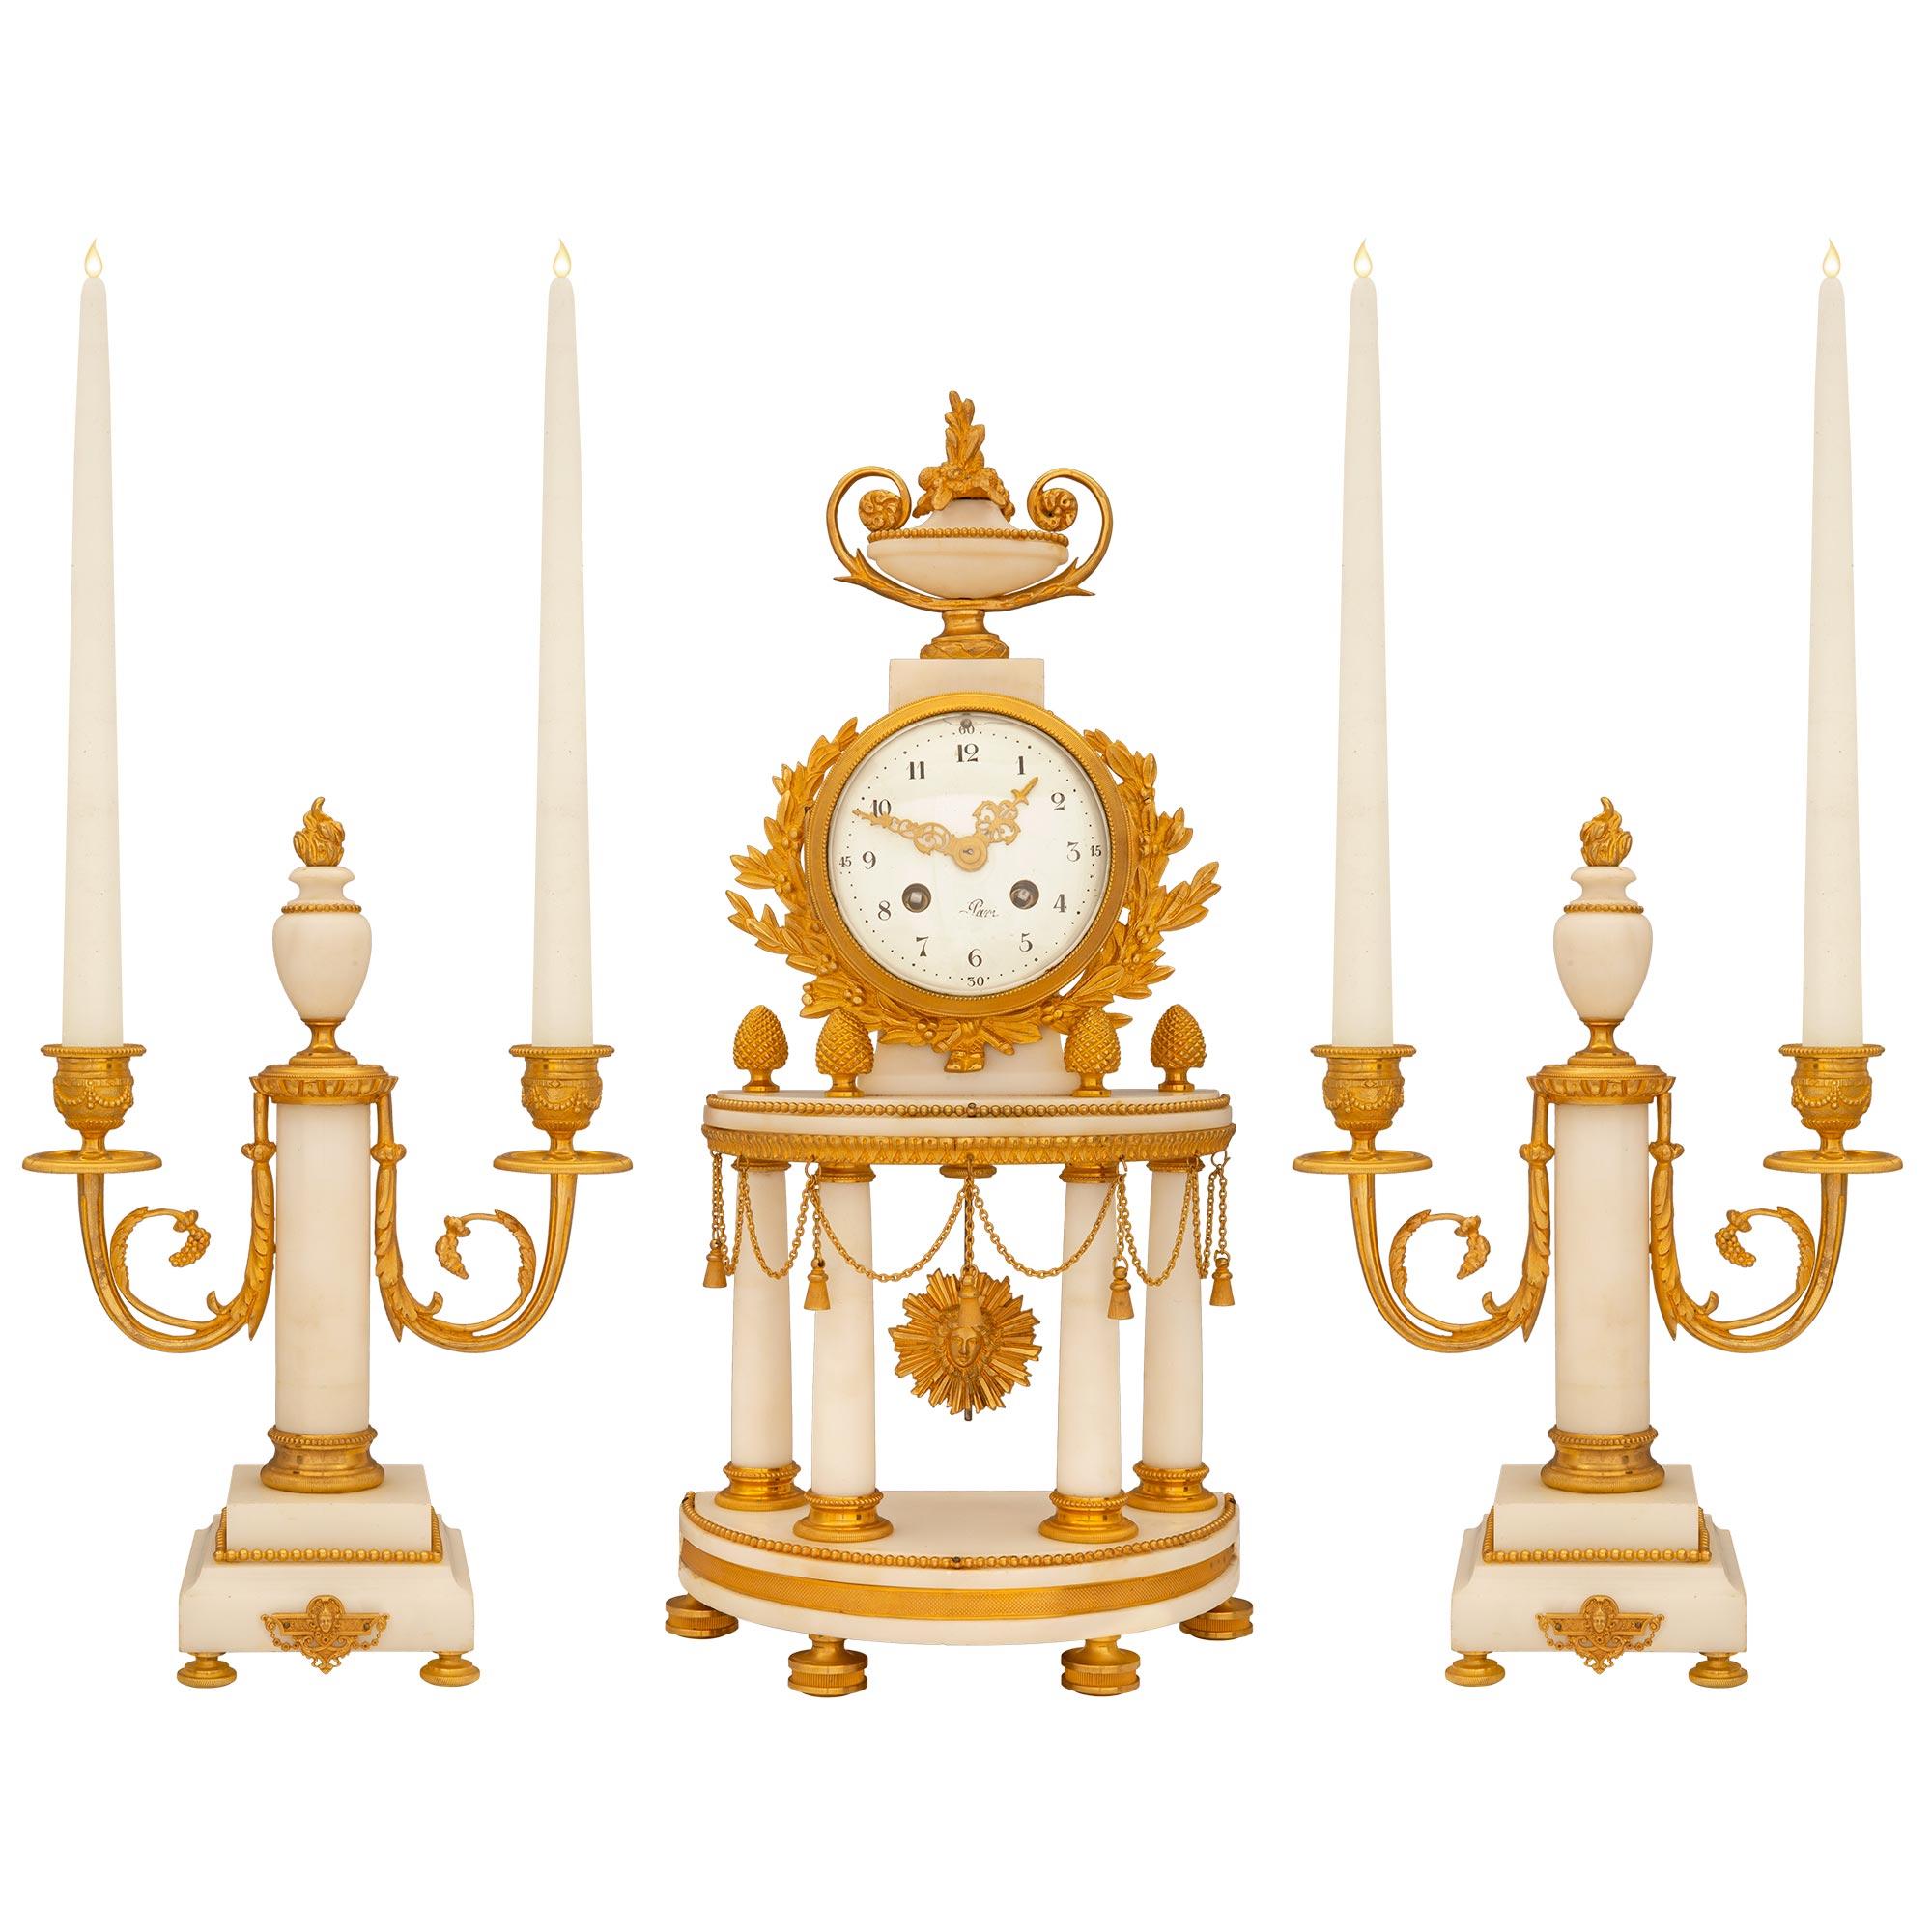 An impressive French 19th century Louis XVI st. ormolu mounted on white Carrara marble clock Garniture set. The three piece set includes a pair of two arm candelabras ormolu mounted with beads and C scrolled arms. The clock is ornamented with ormolu